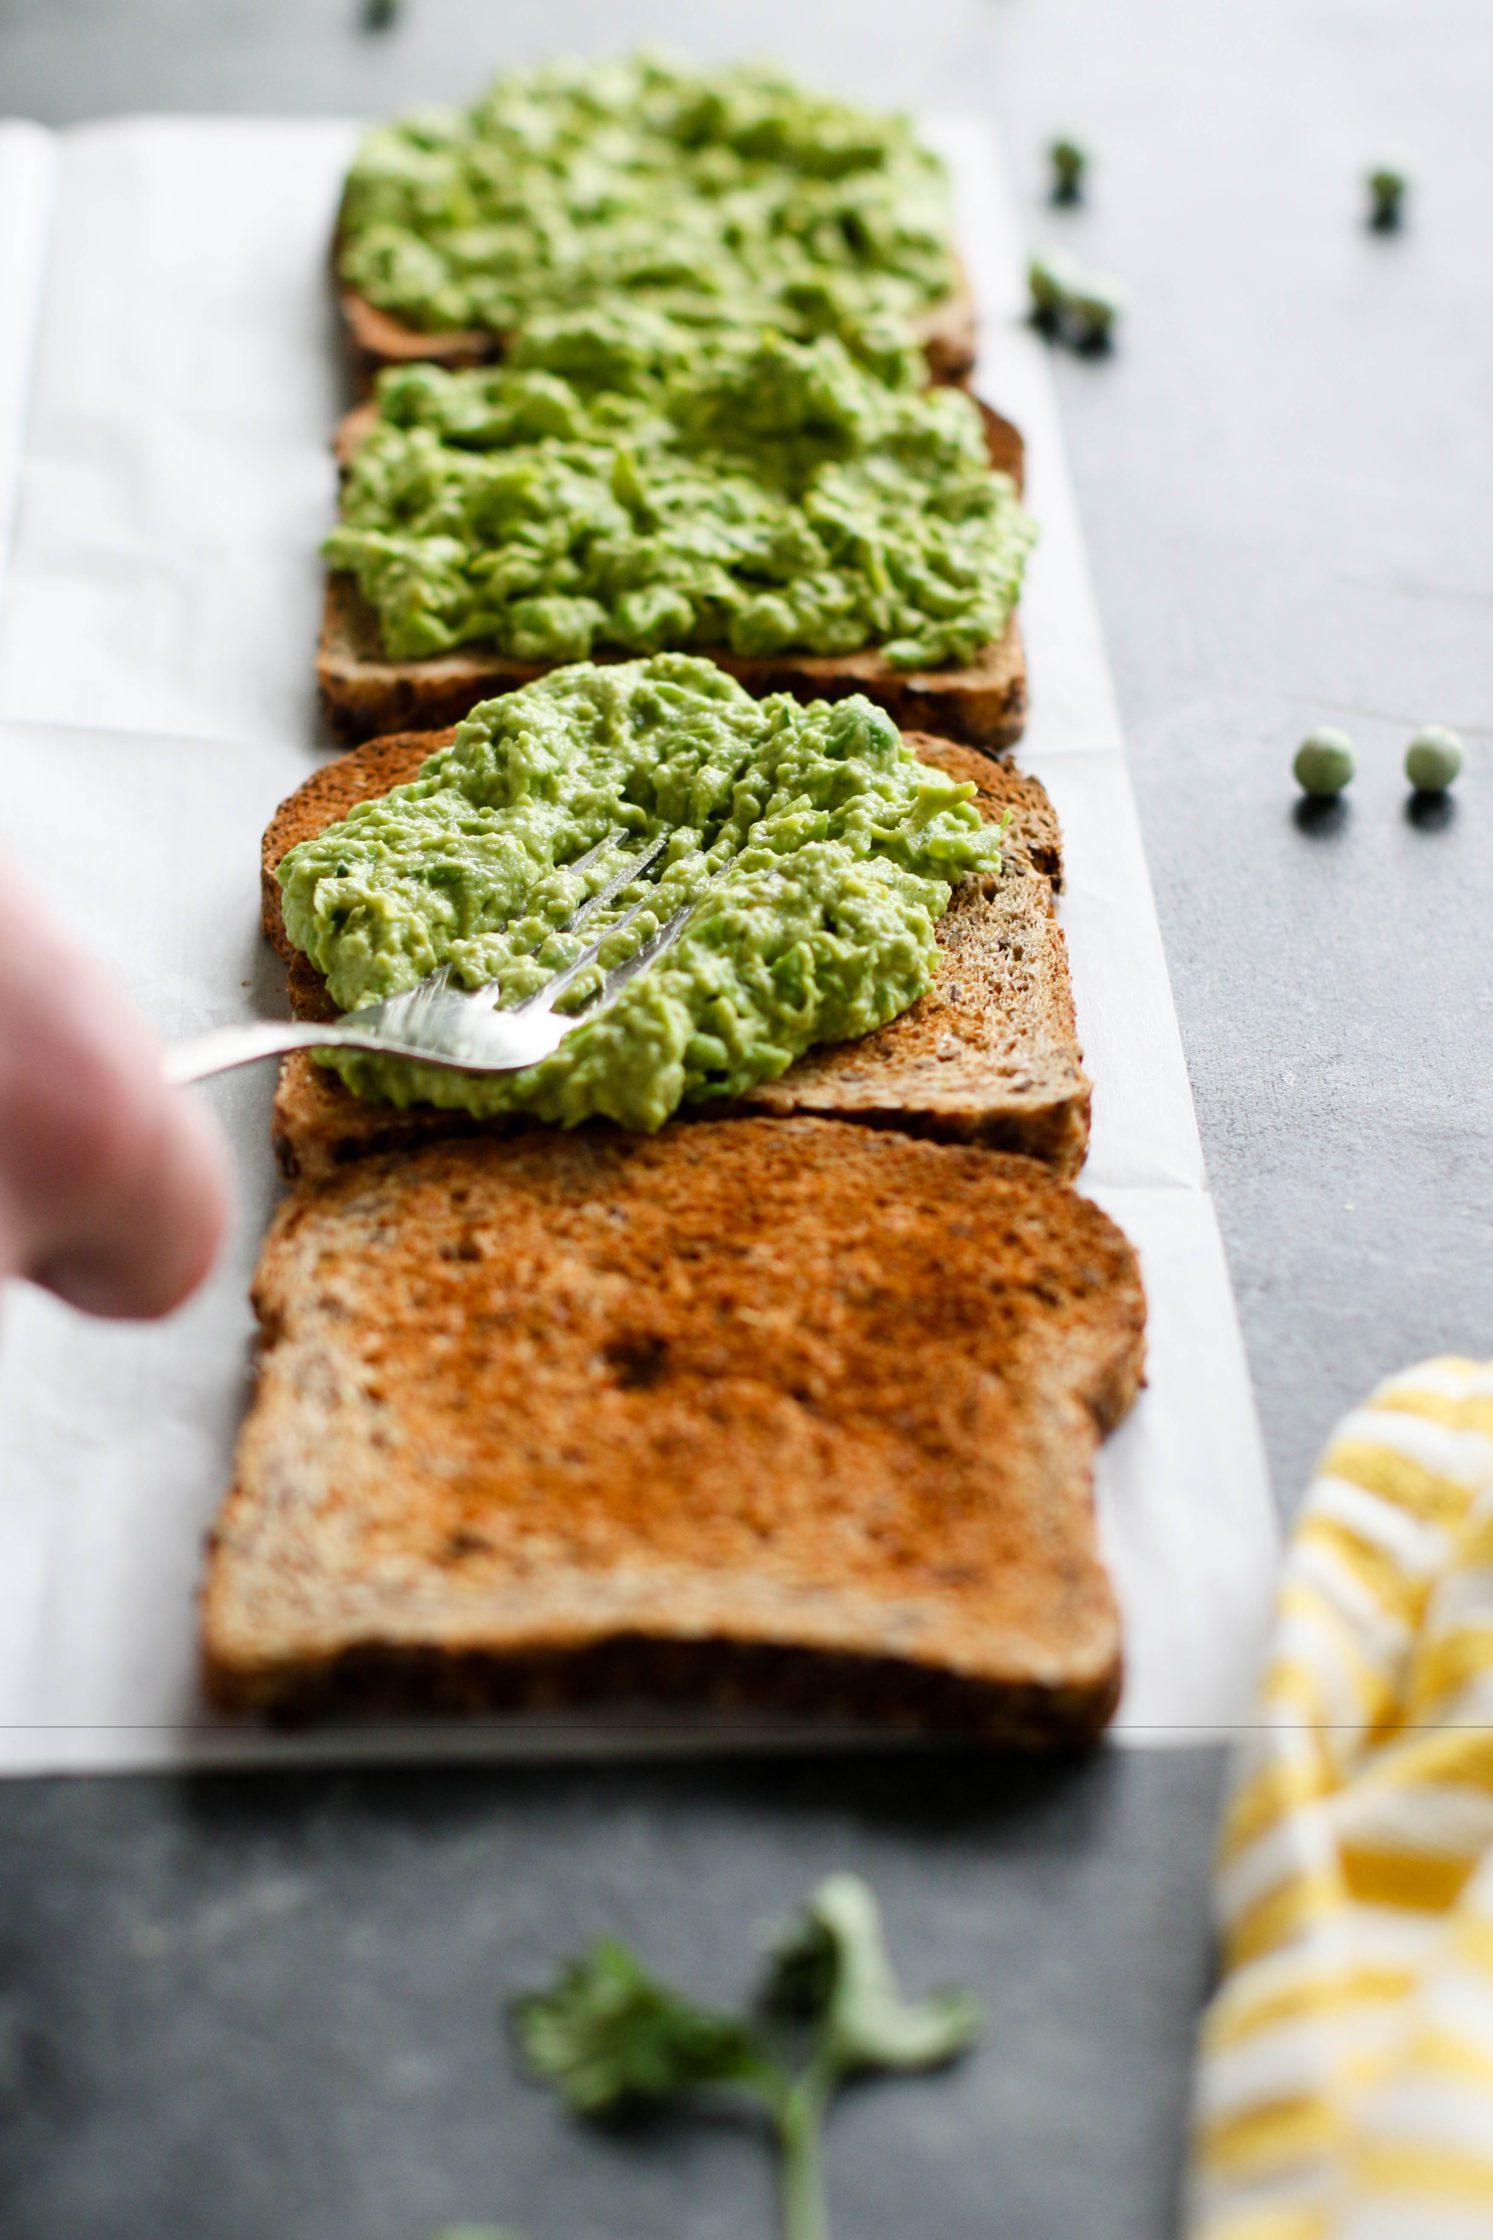 Lemon-y Smashed Pea spread smashed on toasted bread